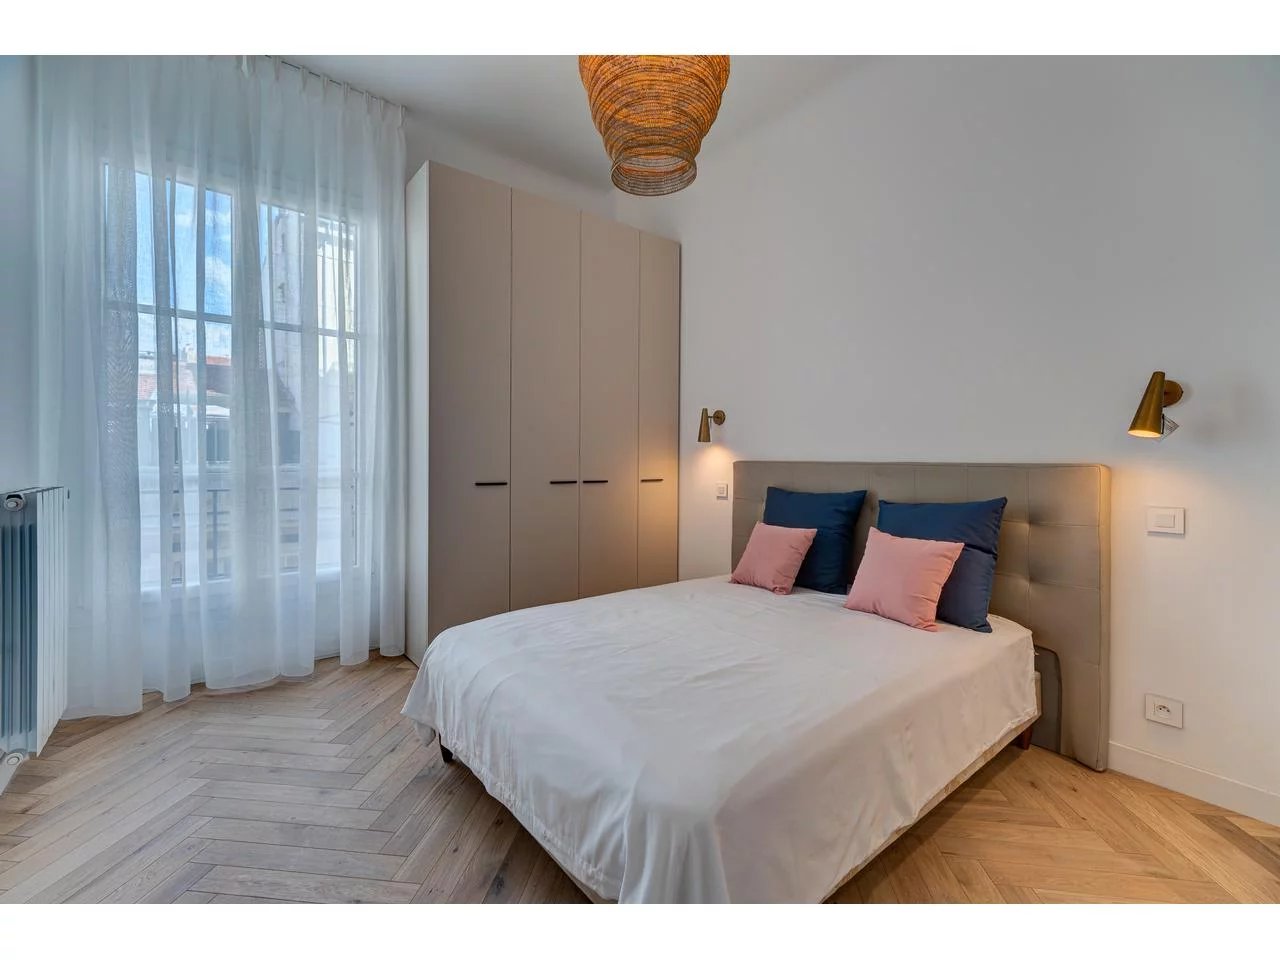 Appartement  3 Rooms 71m2  for sale   748 000 €